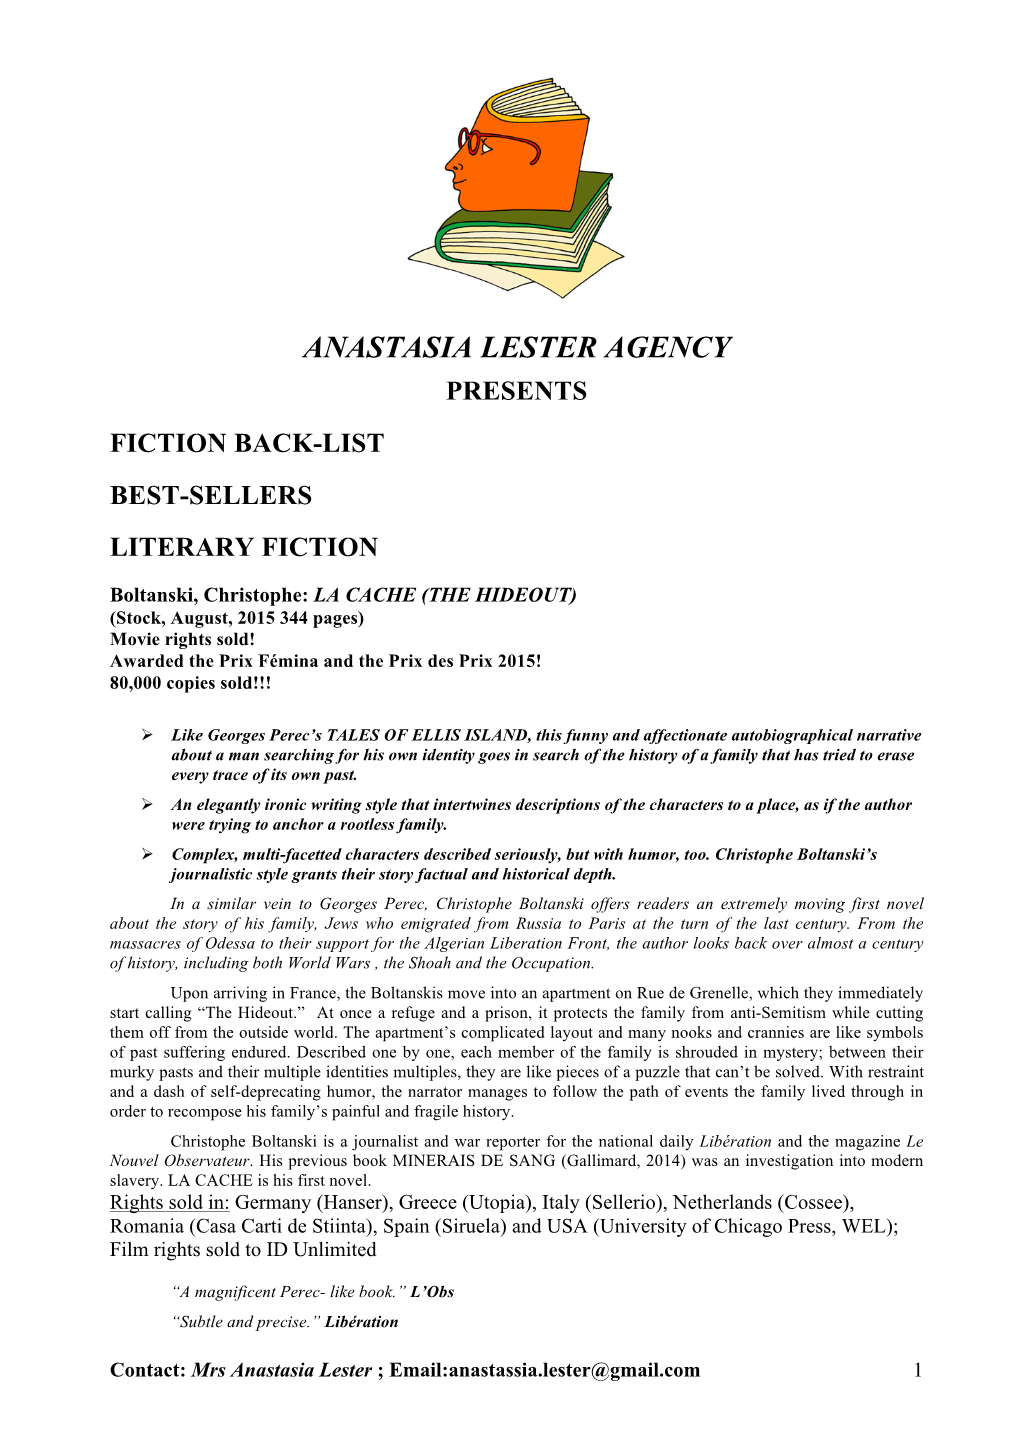 Anastasia Lester Agency Presents Fiction Back-List Best-Sellers Literary Fiction